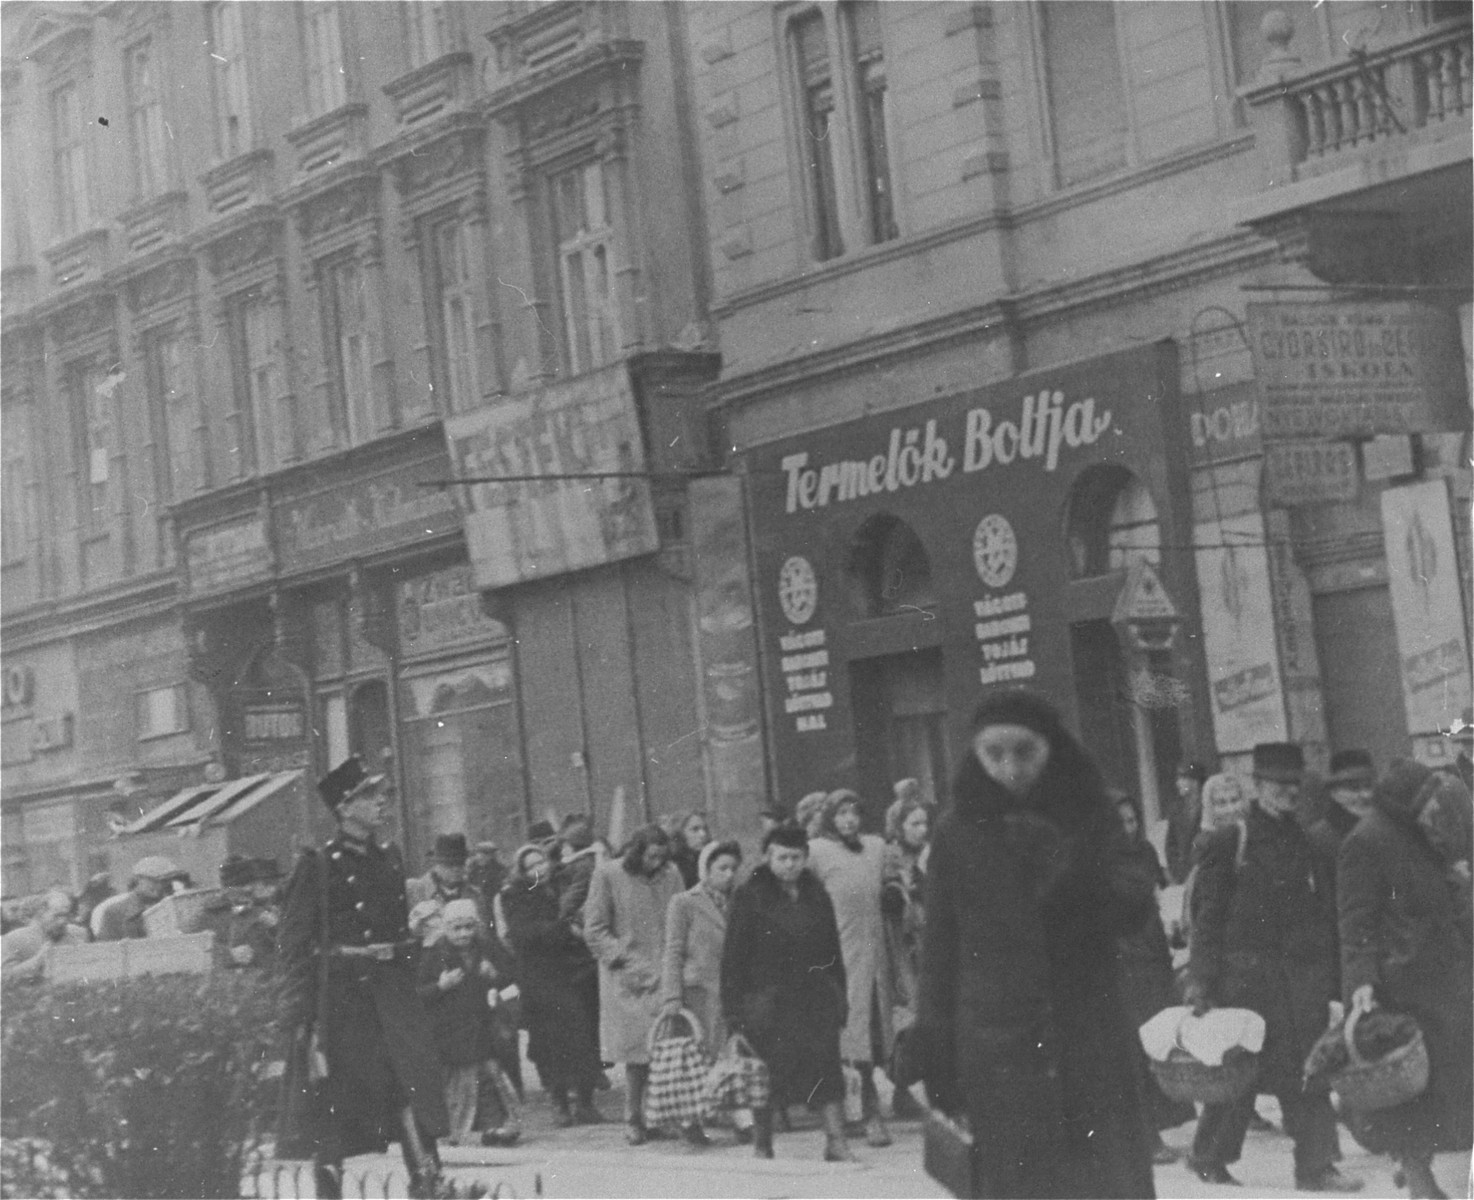 Hungarian Jews and non-Jews walk along the Jozsef Körut [Ring] in Budapest.  Many are holding shopping baskets. 

[Photographer Thomas Veres claimed in the 1990s that this image depicts Jews who were rescued from deportation by Raoul Wallenberg on their way back to the ghetto, but none are wearing the yellow star and many carry shopping baskets and appear to be waiting in line to enter a public market.]